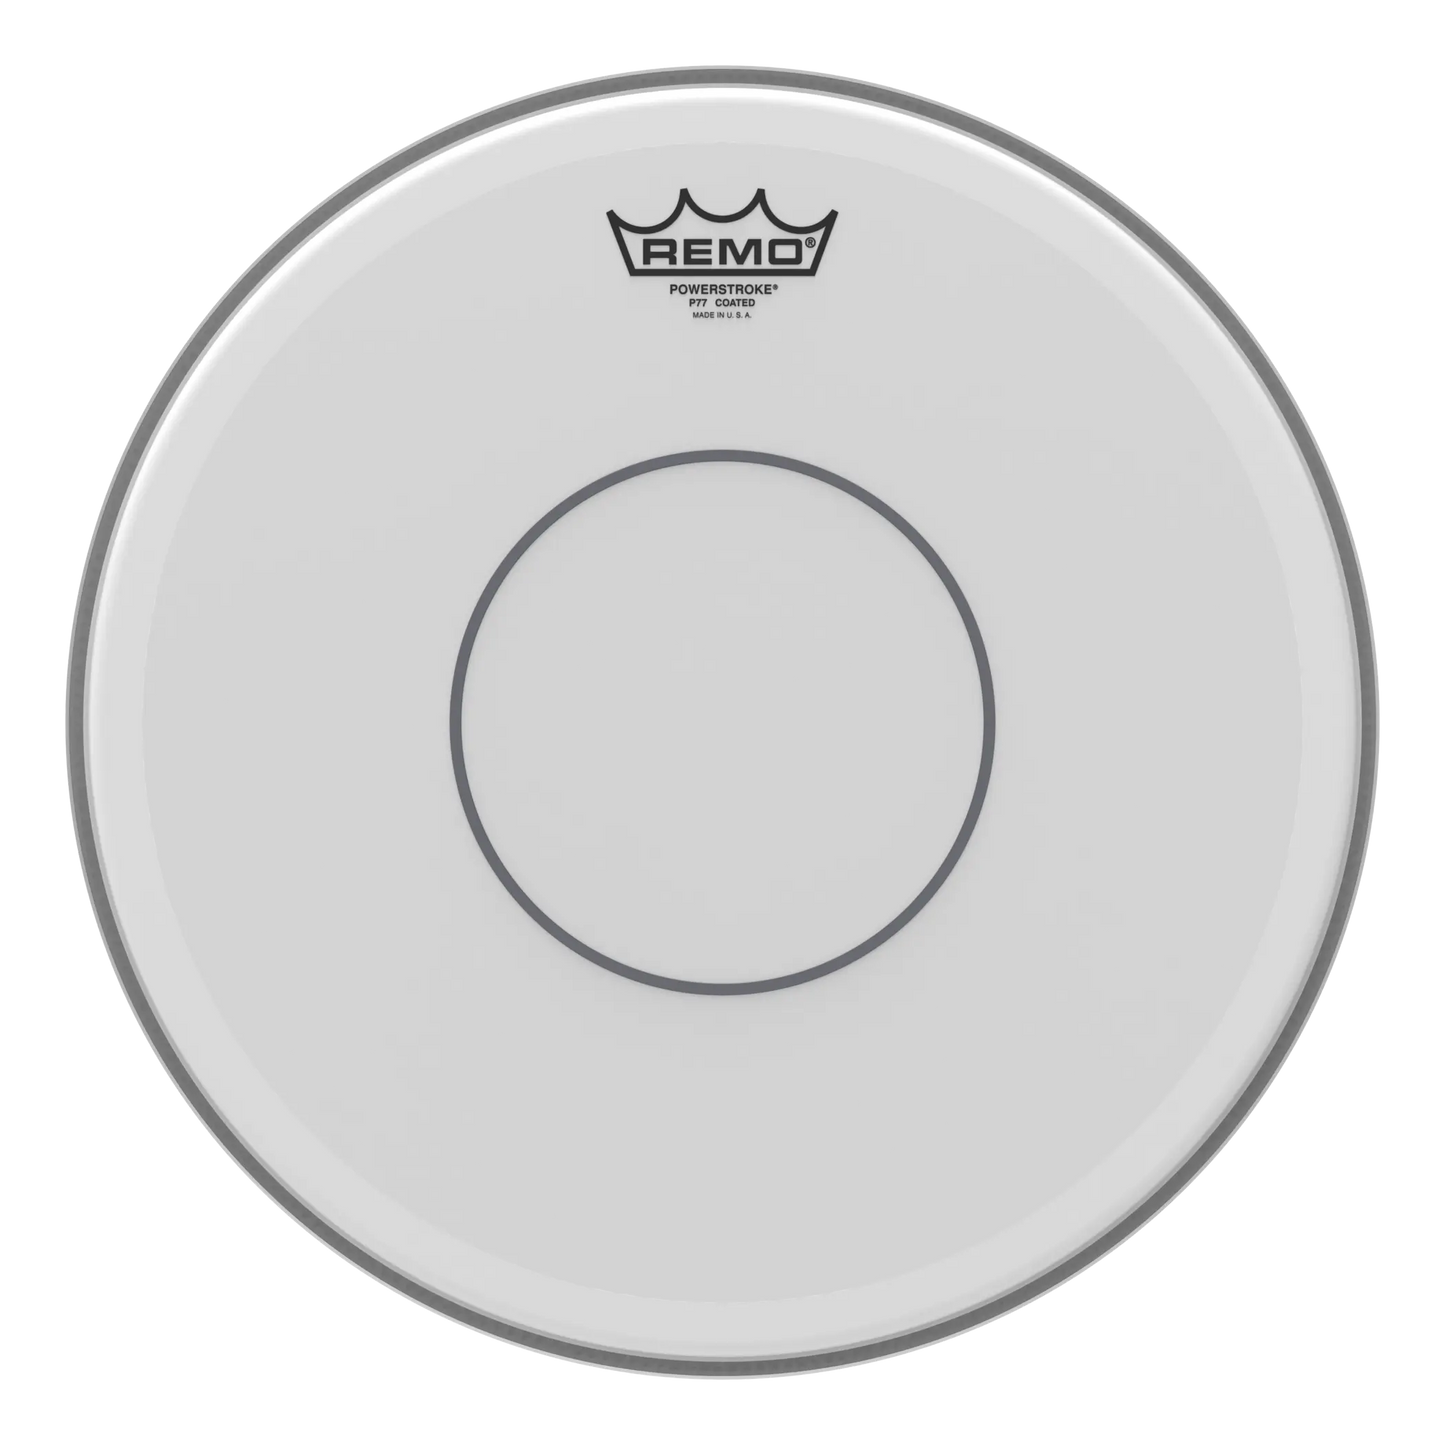 Remo - Powerstroke 77 Coated Clear Dot Drumhead